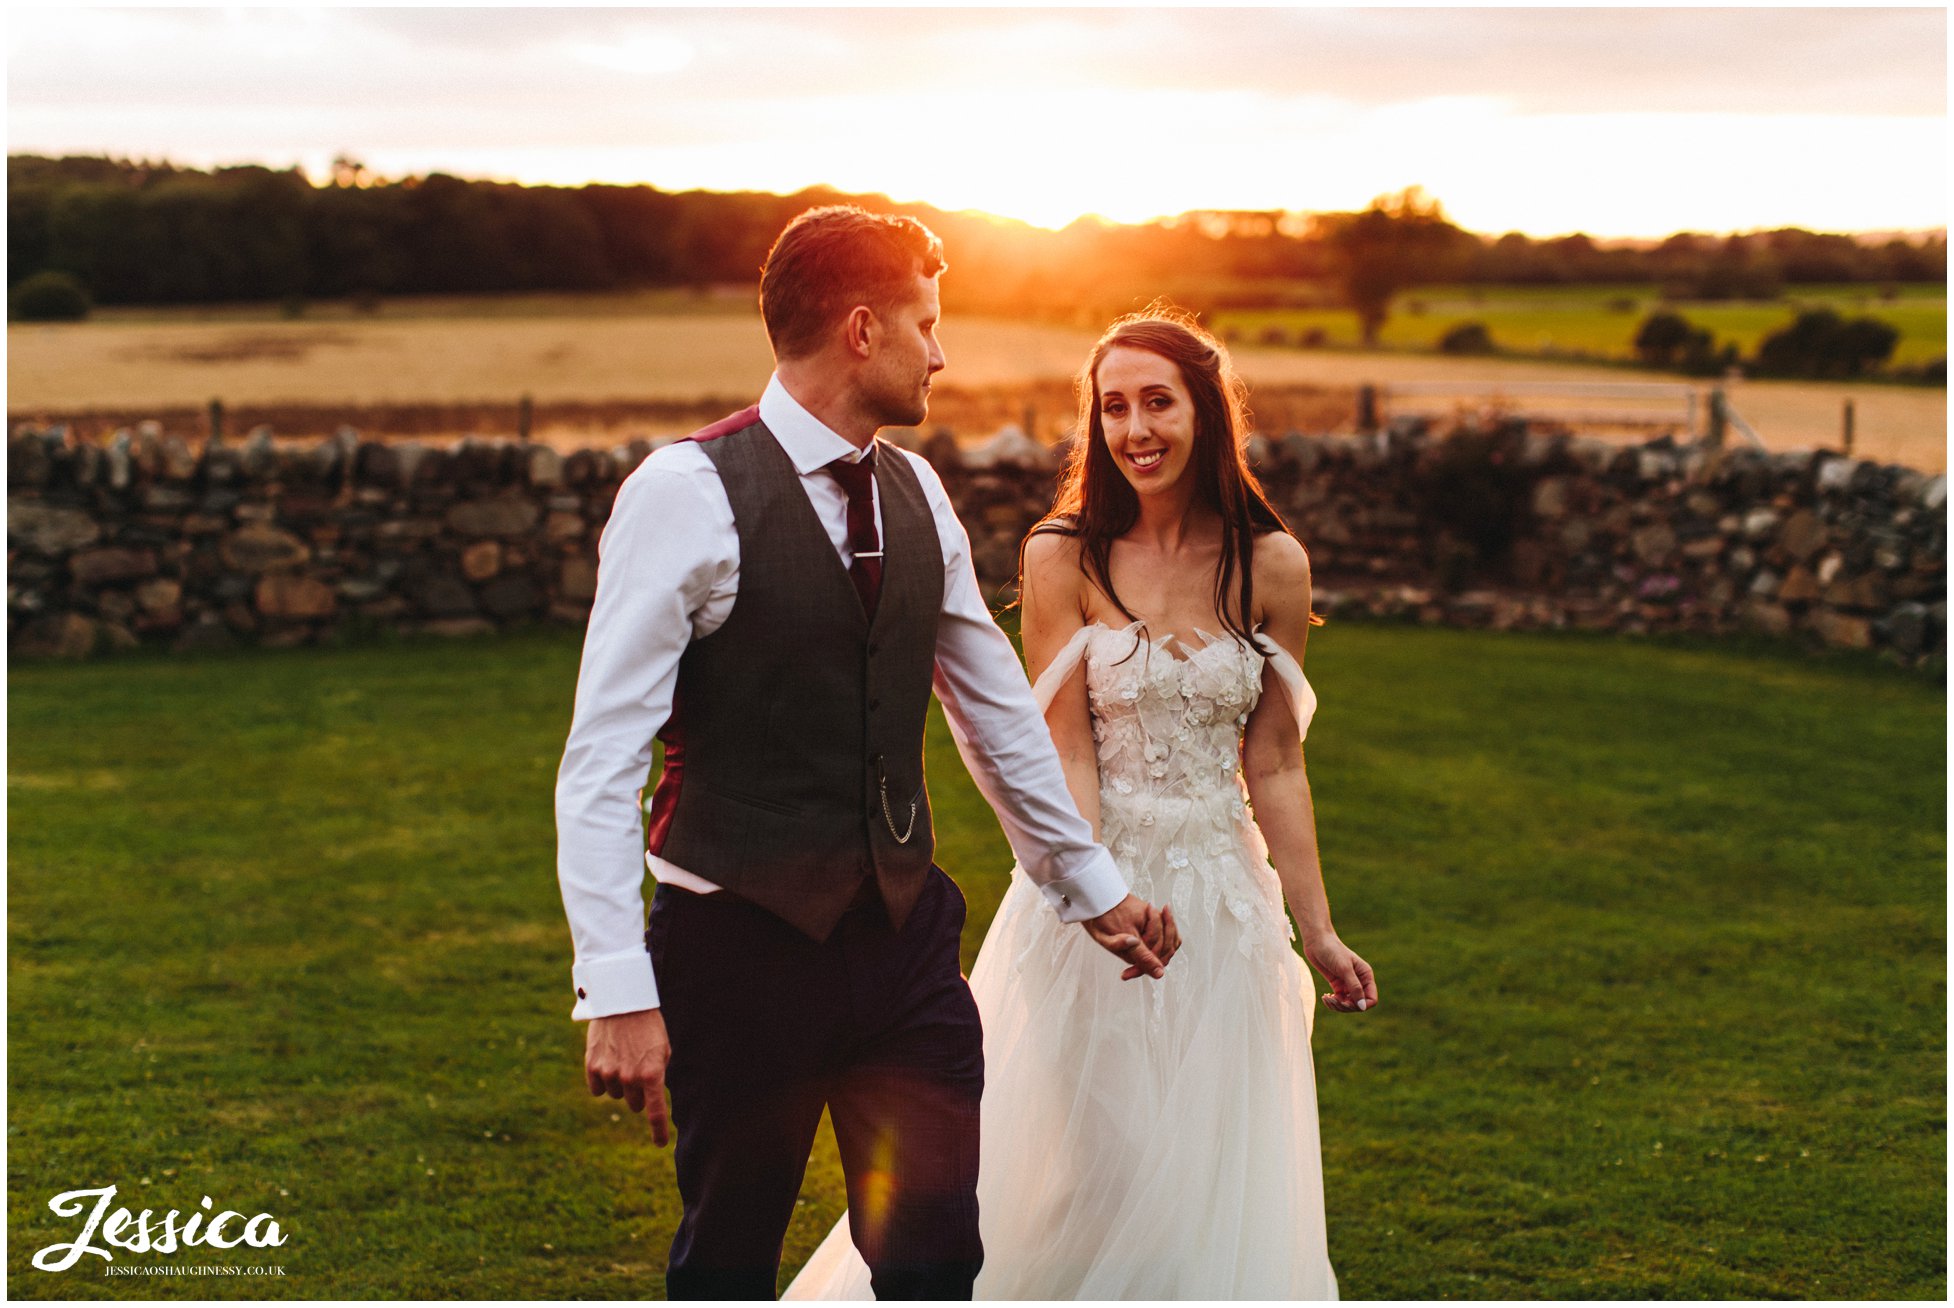 newly wed's walk together during golden hour